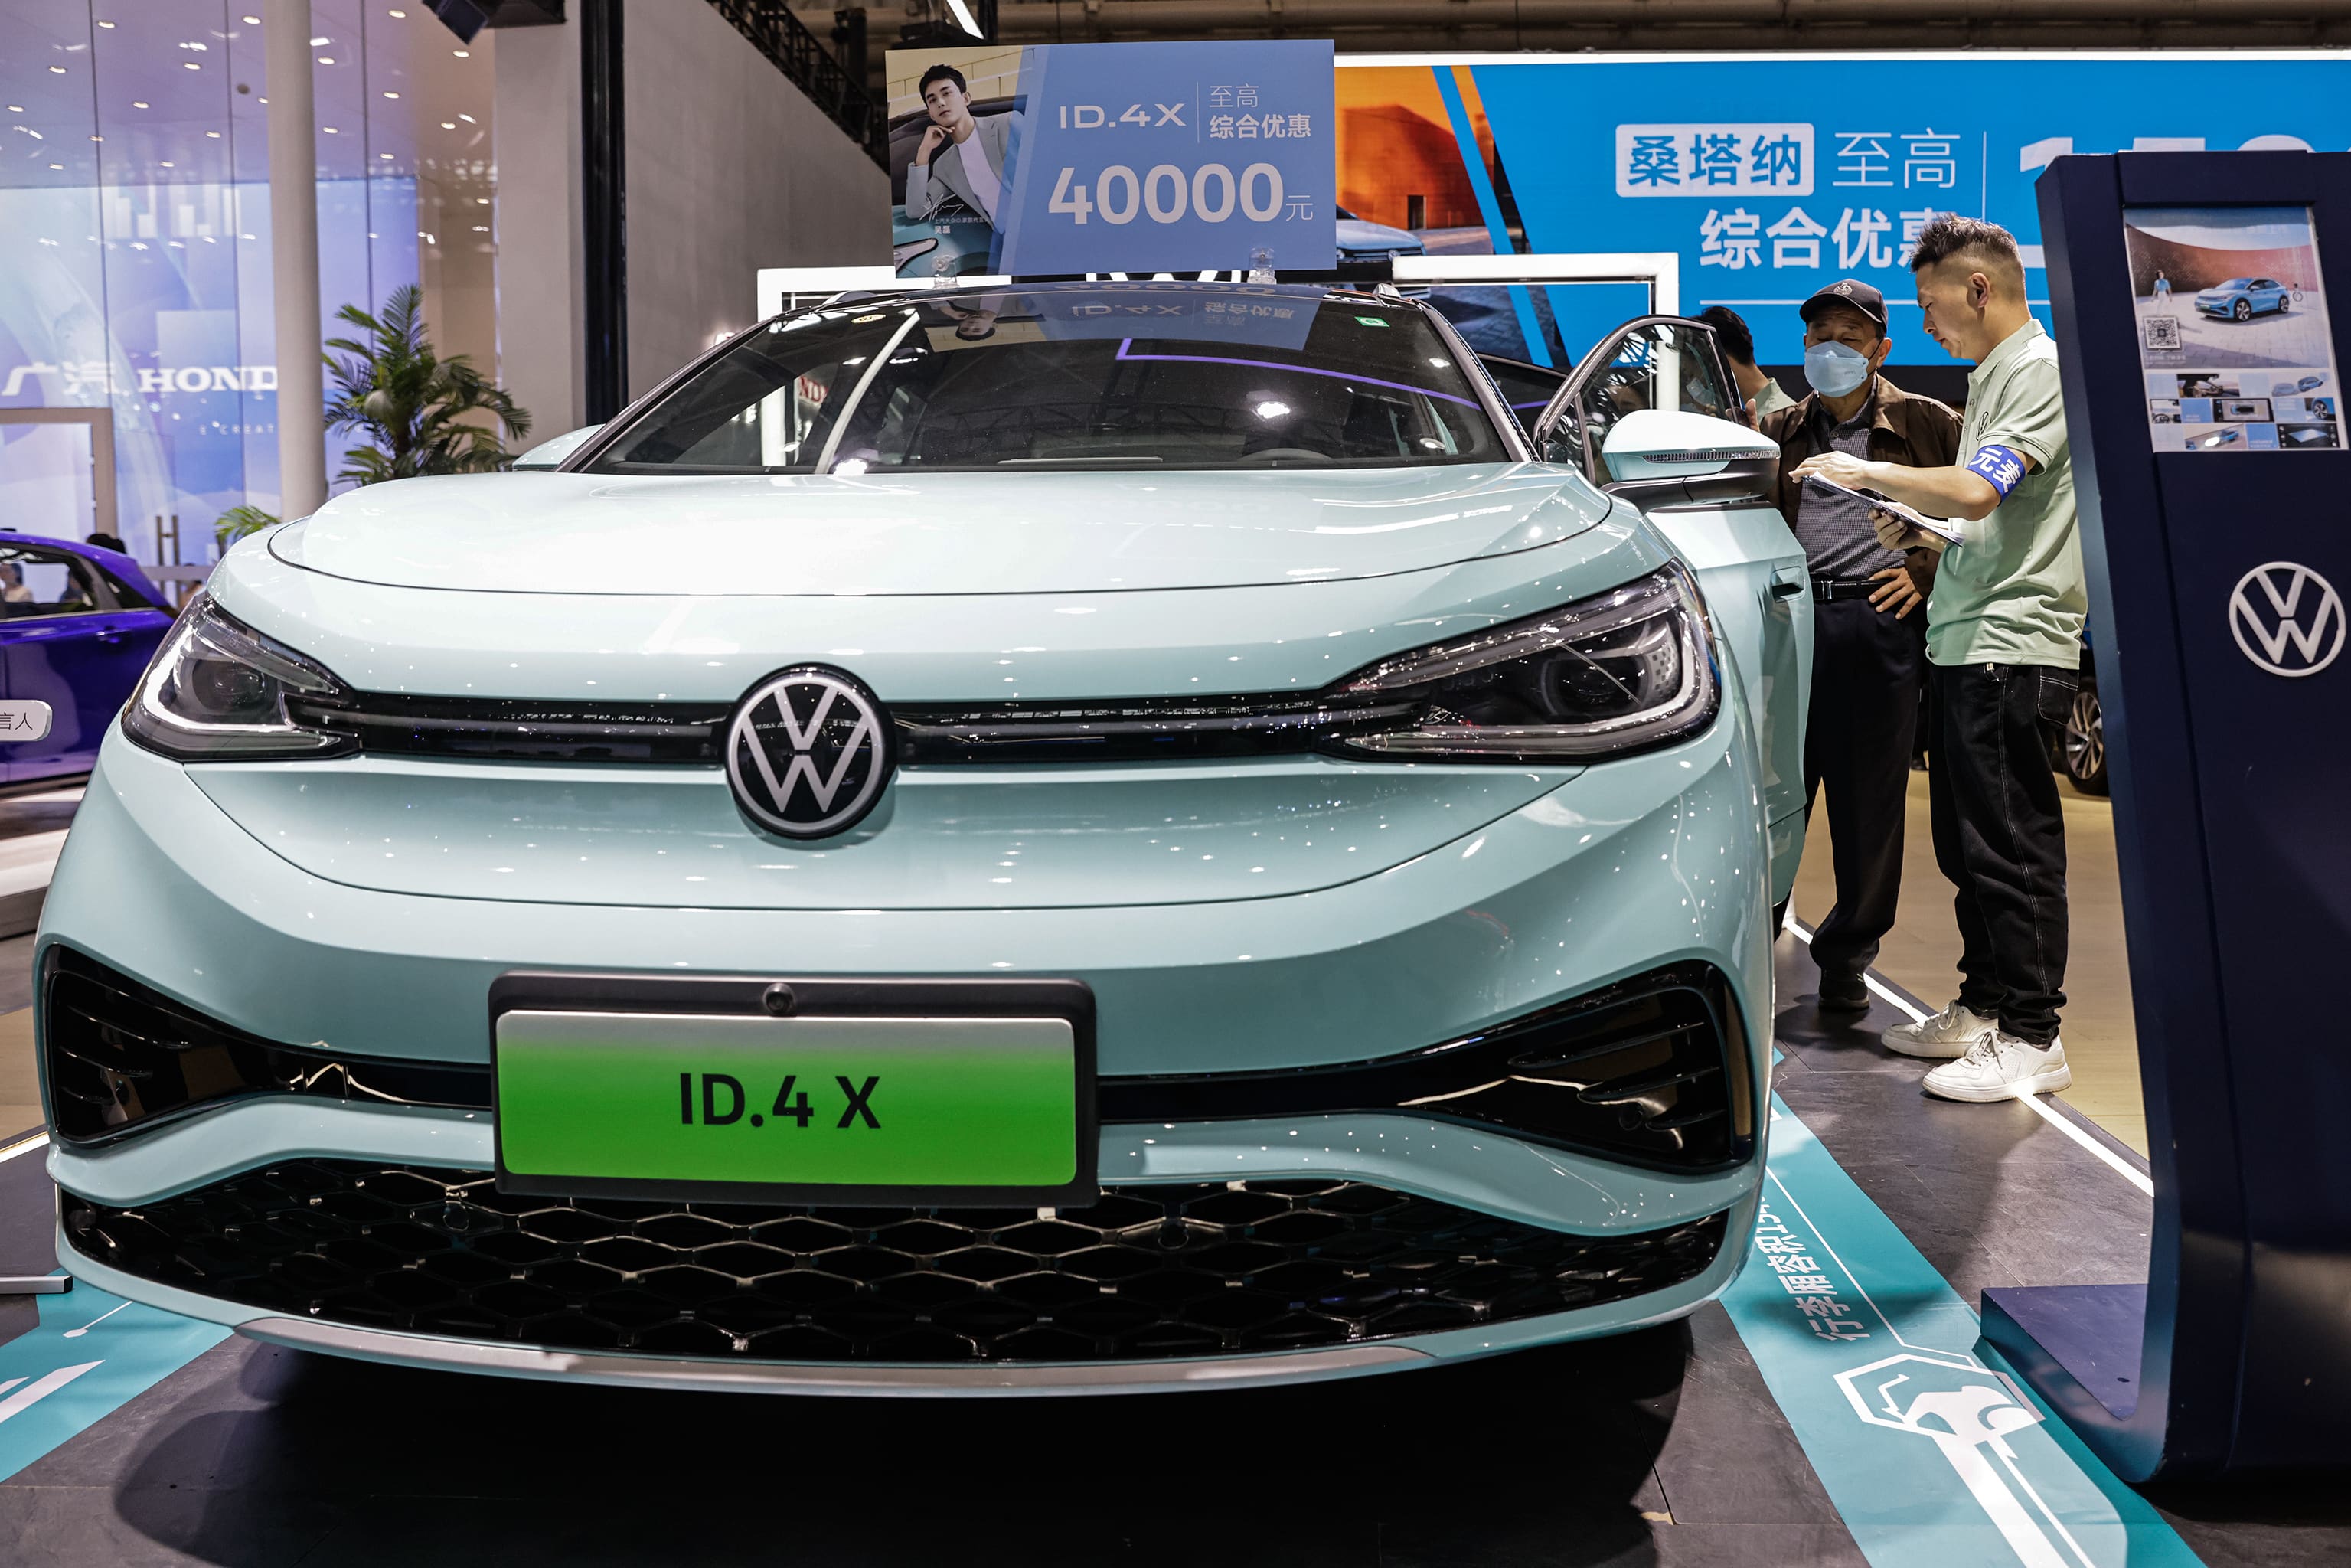 Chinese EV maker Xpeng sees highest deliveries this year but is eclipsed by rivals Nio, Li Auto